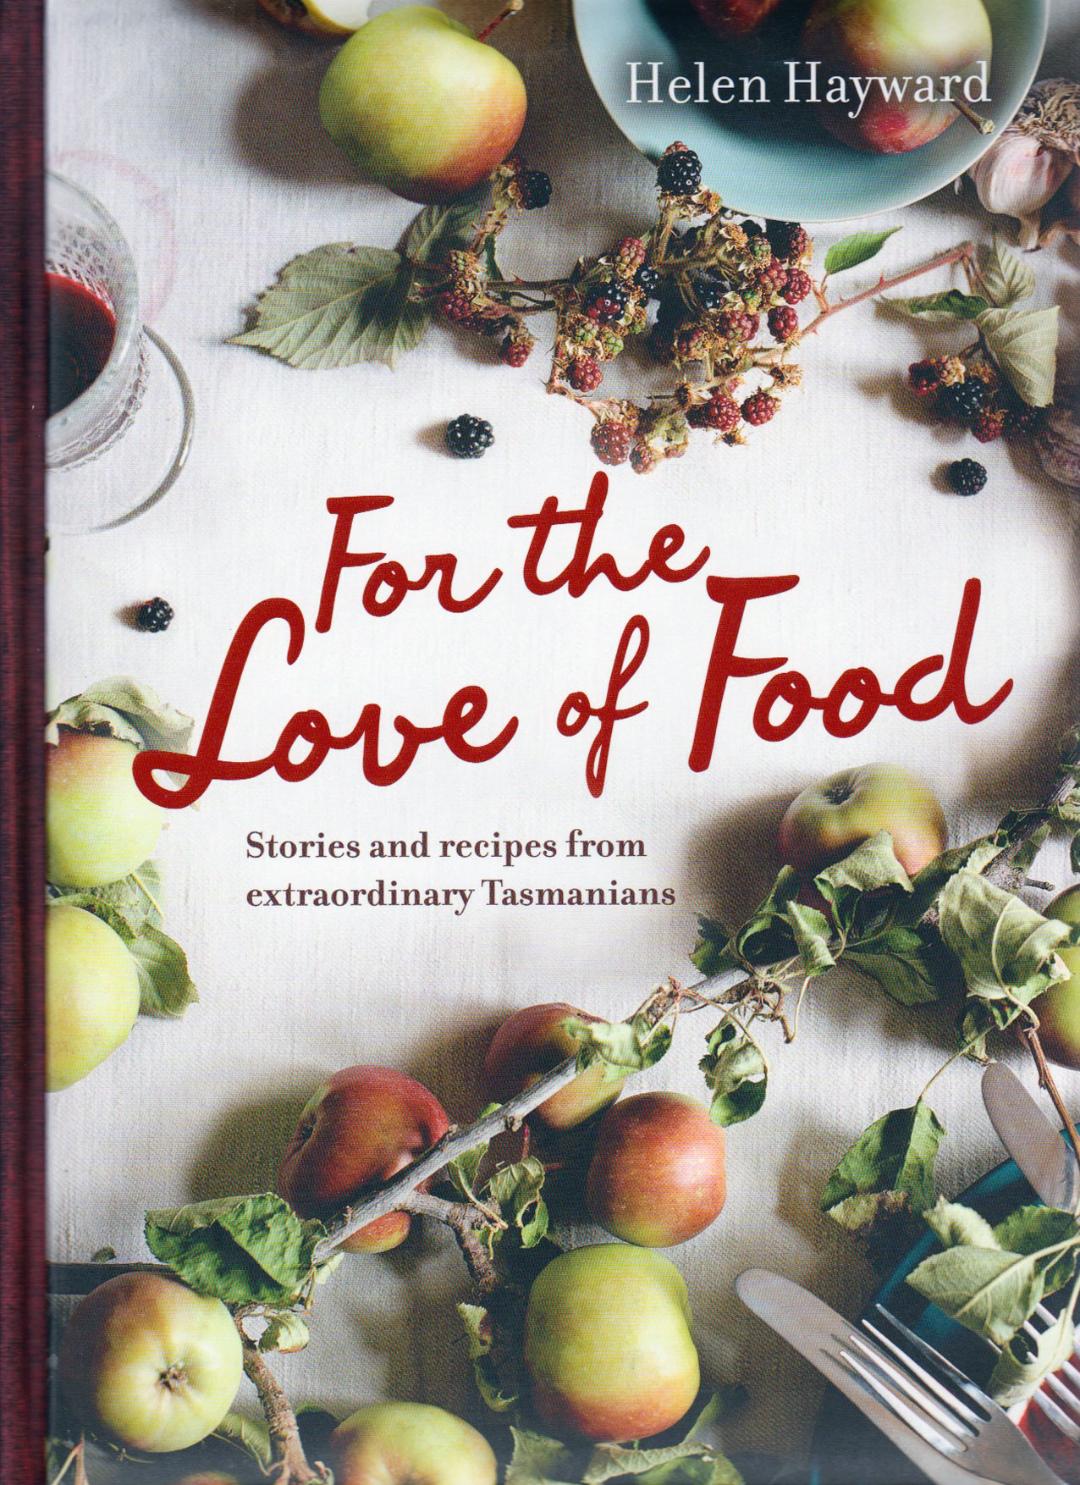 For the Love of Food - stories & recipes from extraordinary Tasmanians